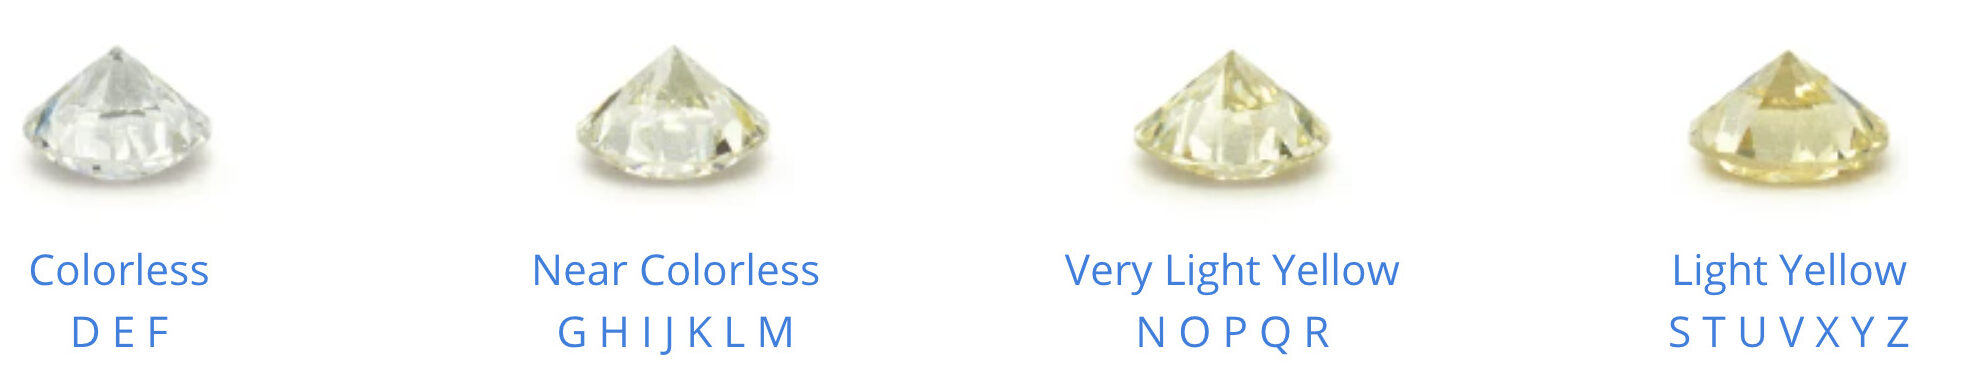 Engagement Ring Diamond Buying Guide Color Scale Tampa Bay Jeweler International Diamond Center